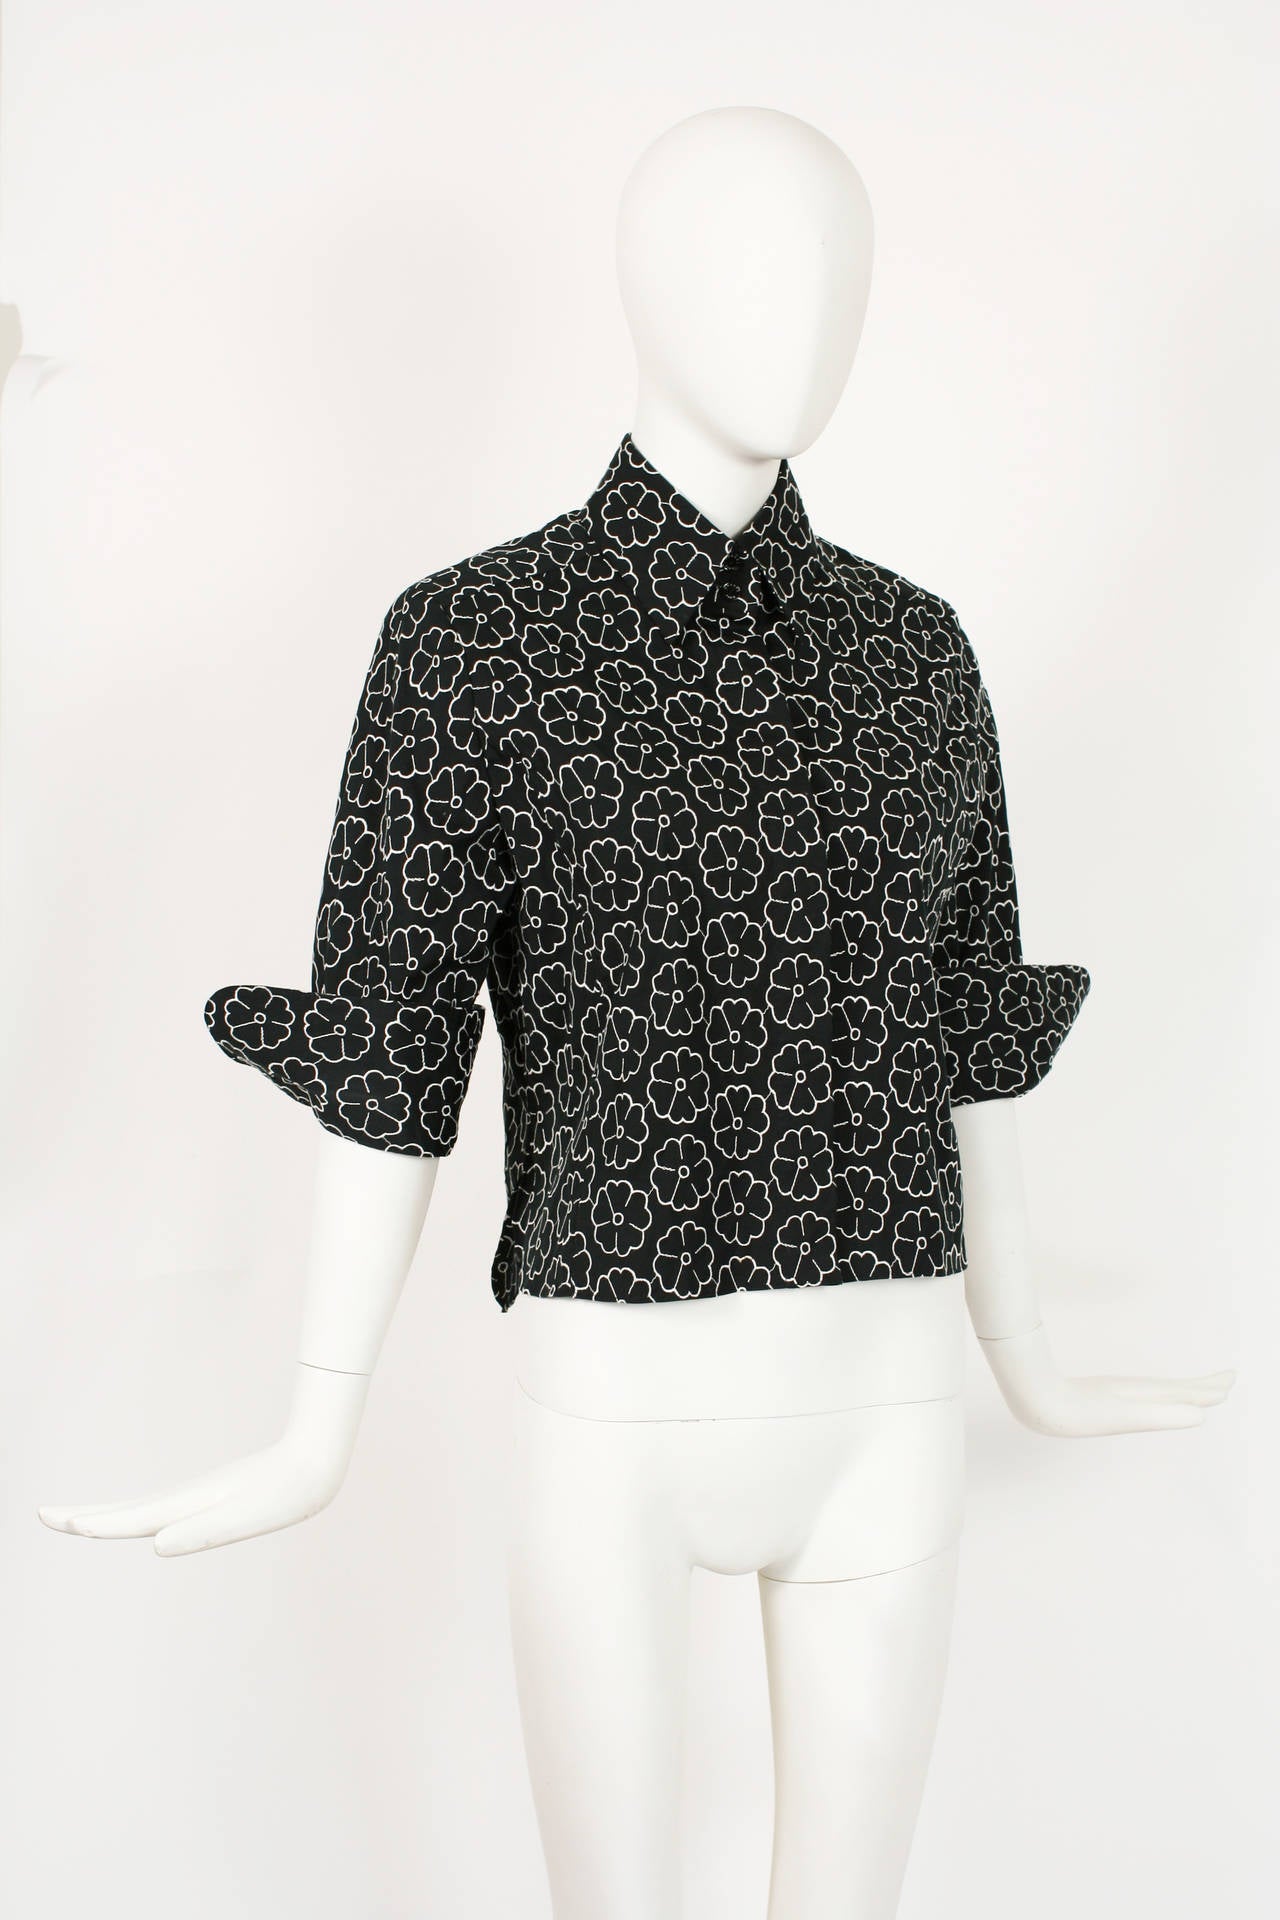 CHANEL black button down shirt embroidered with camellias, 3/4 length sleeves with side slits at bottom. Five  small buttons etched CHANEL PARIS.  
From the 2004 P collection. Size 44 or medium.  
The fabric is 78% cotton, 17% polyamide and 5%